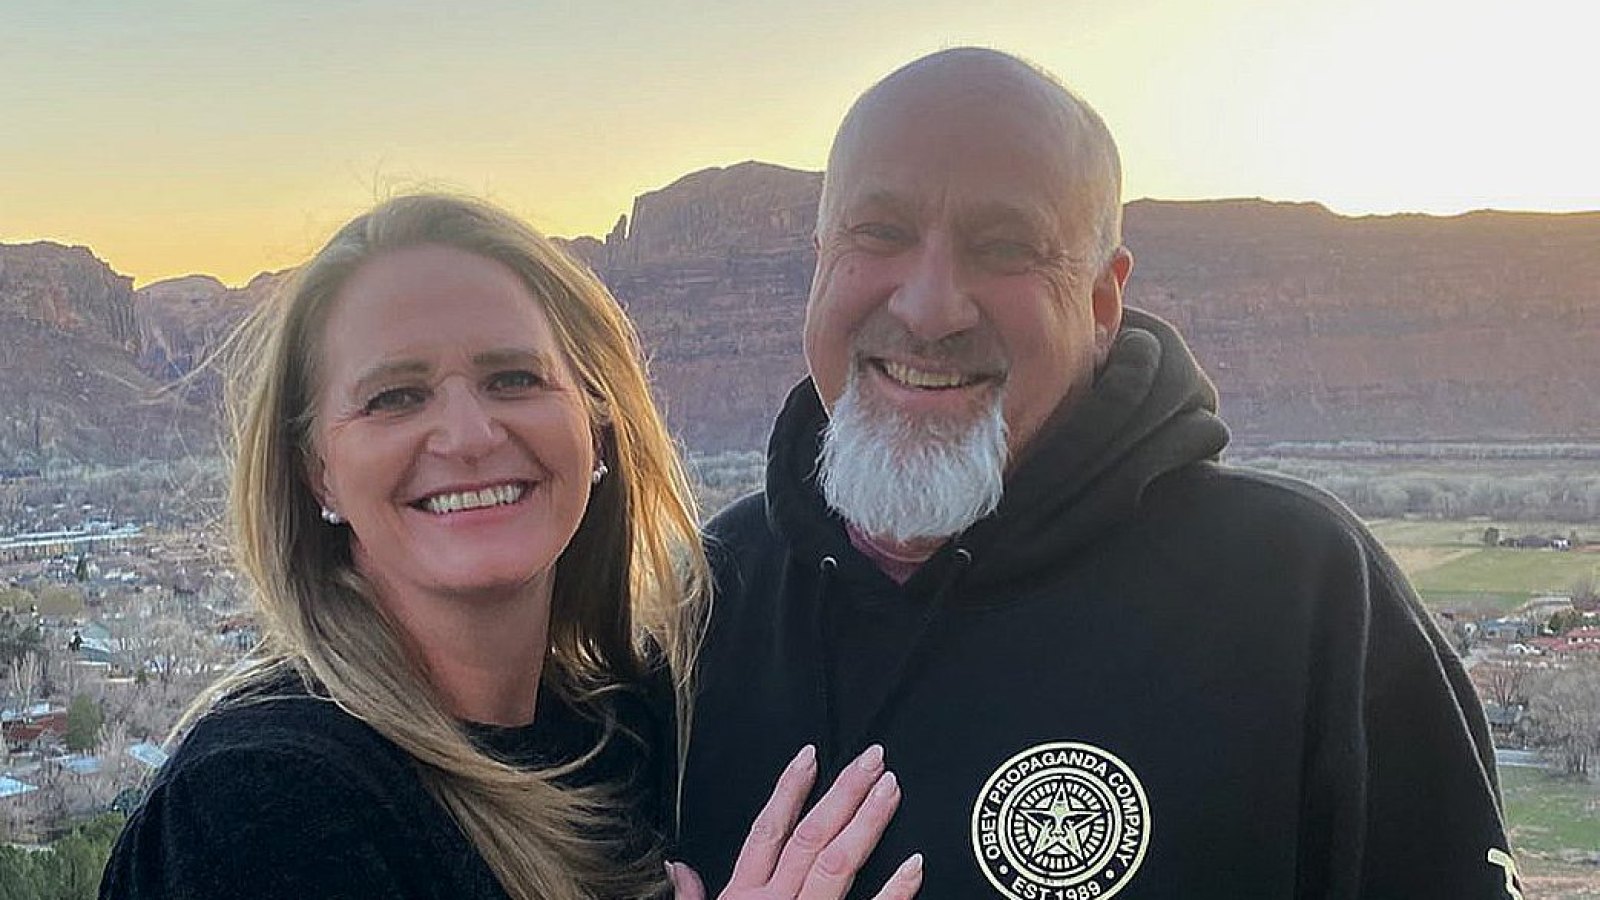 'Sister Wives' Star Christine Brown Offers a Glimpse at Her New 'Memories' With Boyfriend David Woolley and Daughter Truely